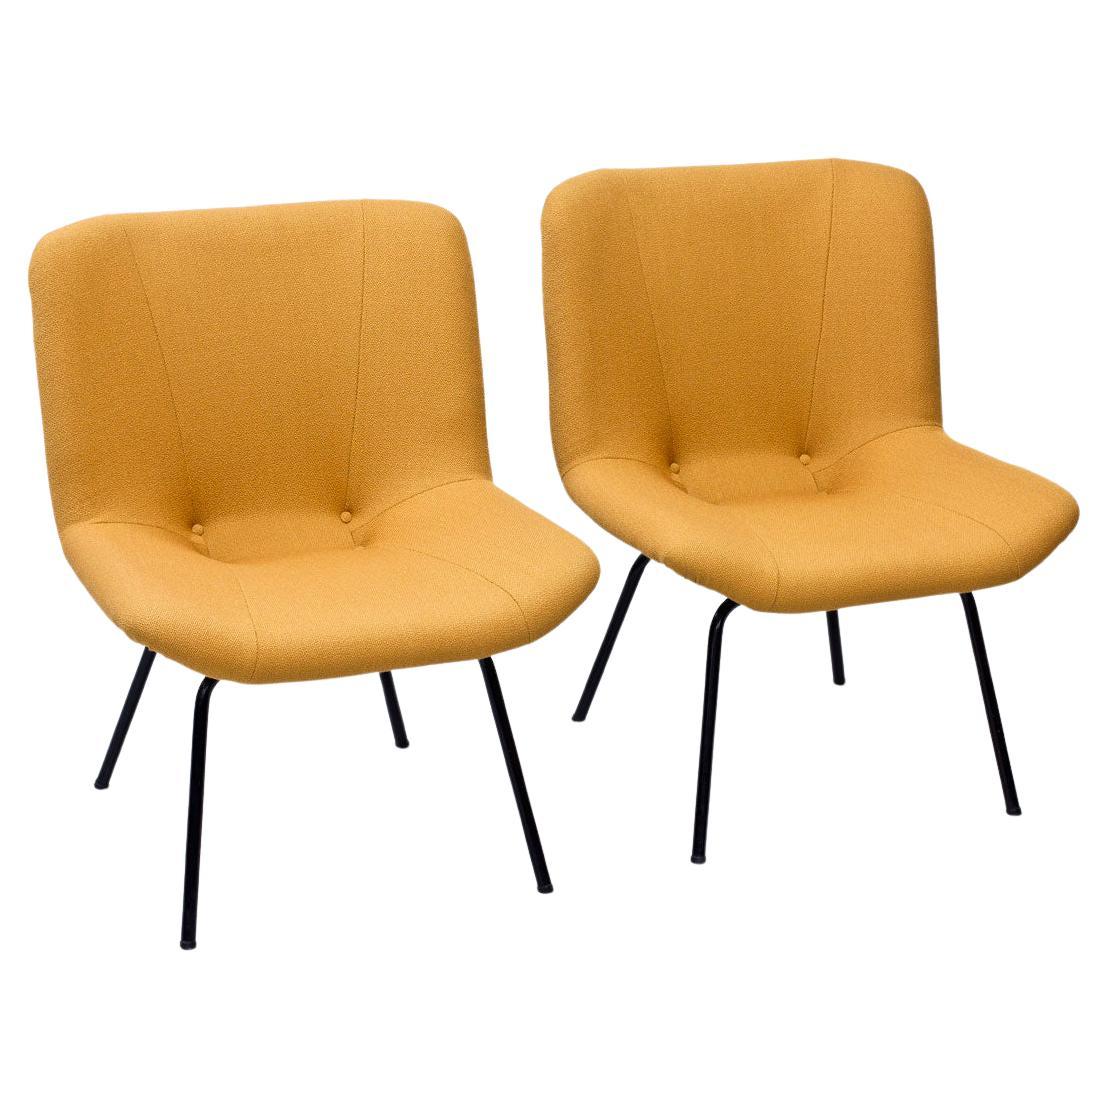 Scandinavian Modern Lounge Chairs by Carl Gustaf Hiort Af Ornäs, Finland For Sale